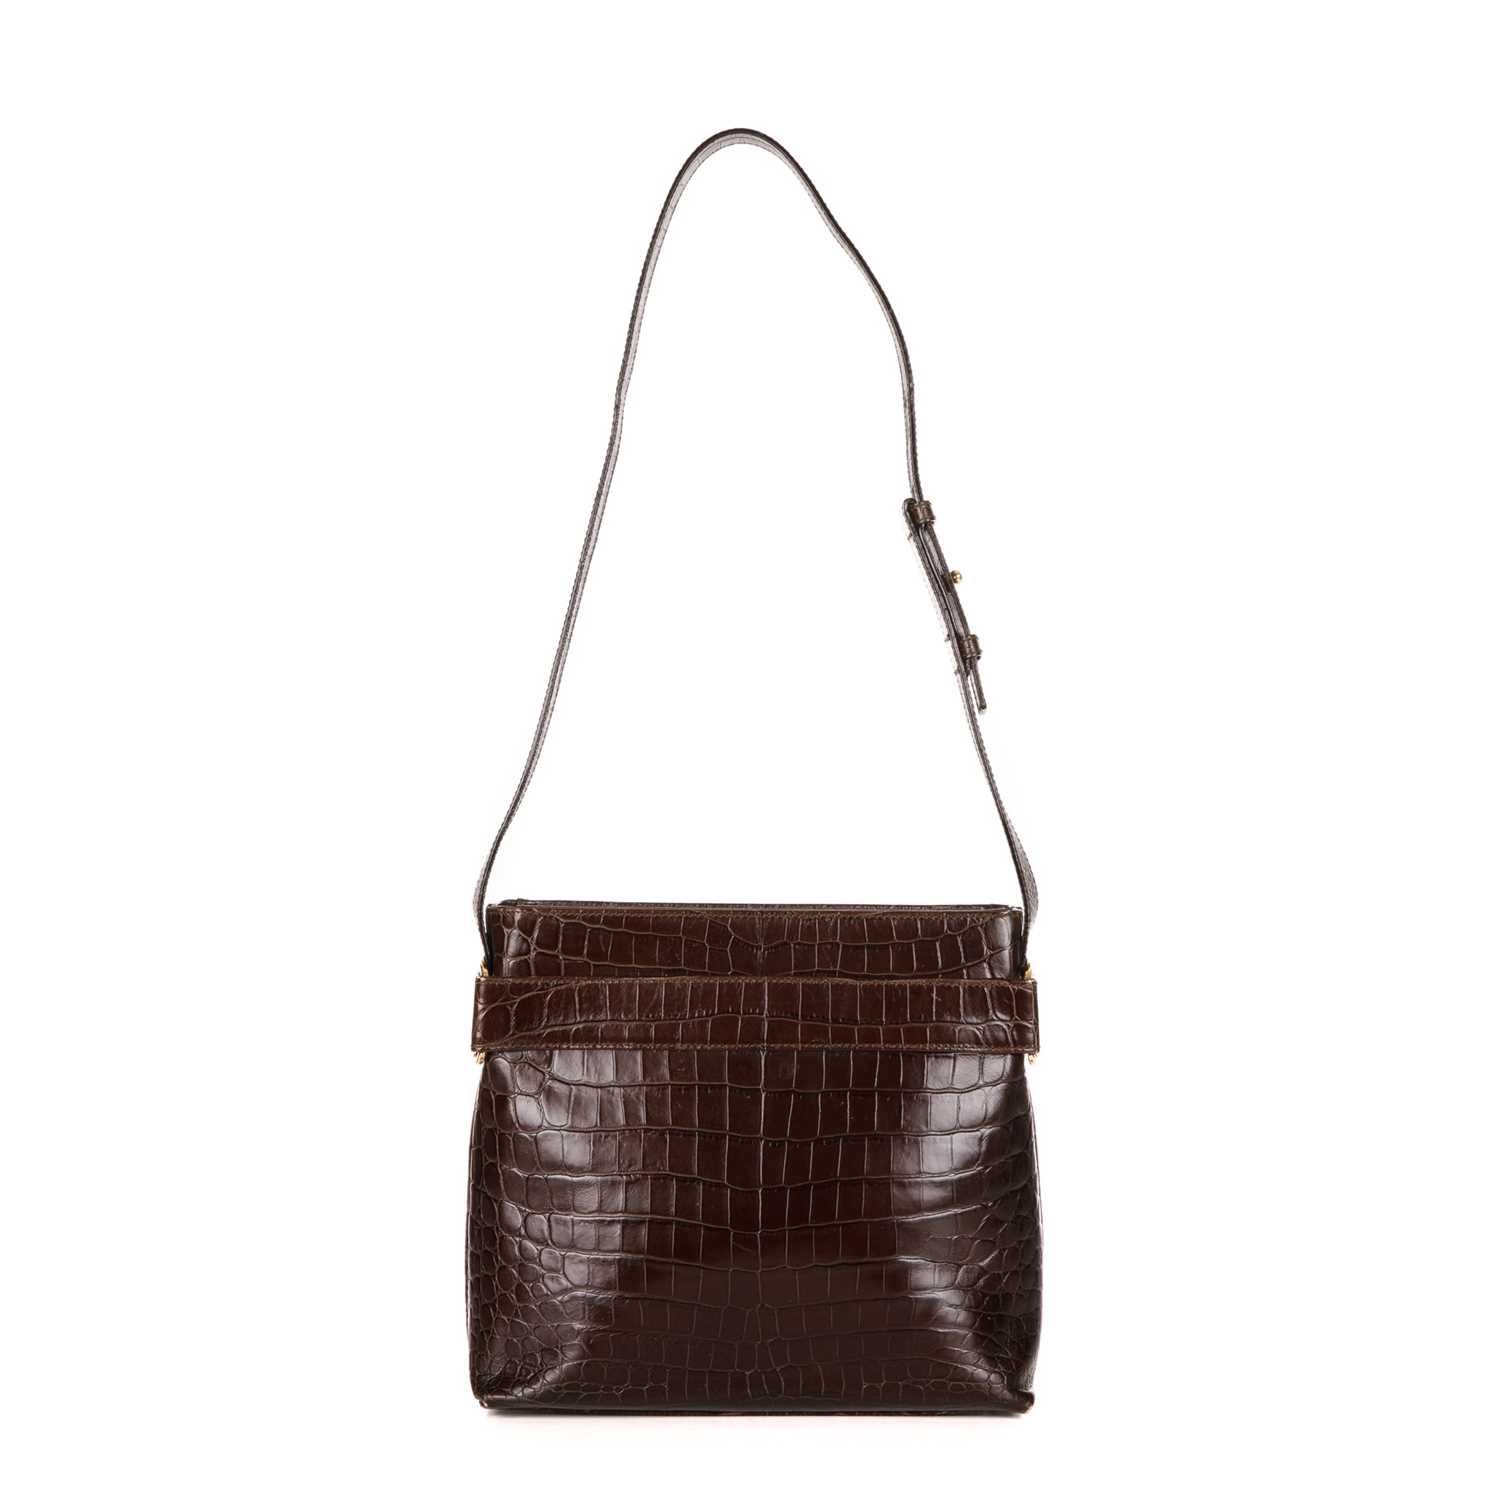 Salvatore Ferragamo, an embossed leather handbag, designed with a brown crocodile embossed leather